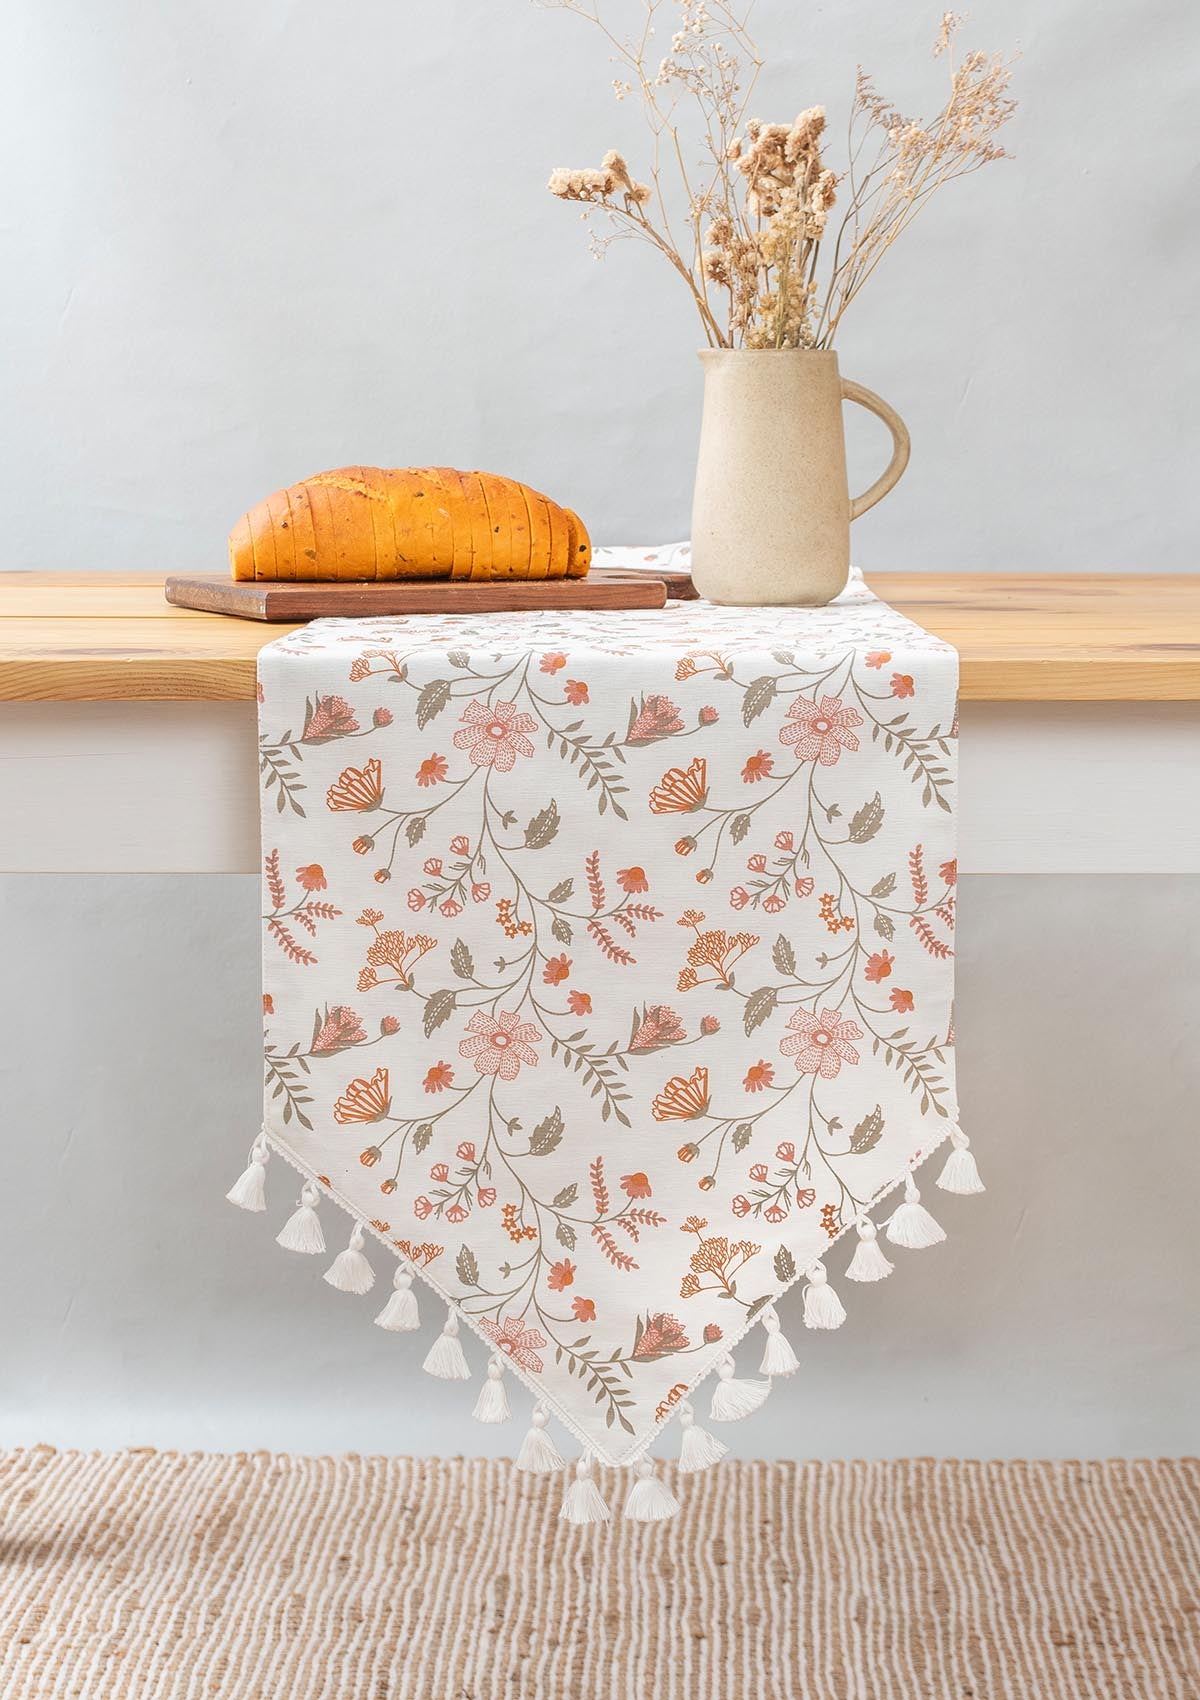 Forest bloom 100% cotton floral table runner for 4 seater or 6 seater Dining with tassels